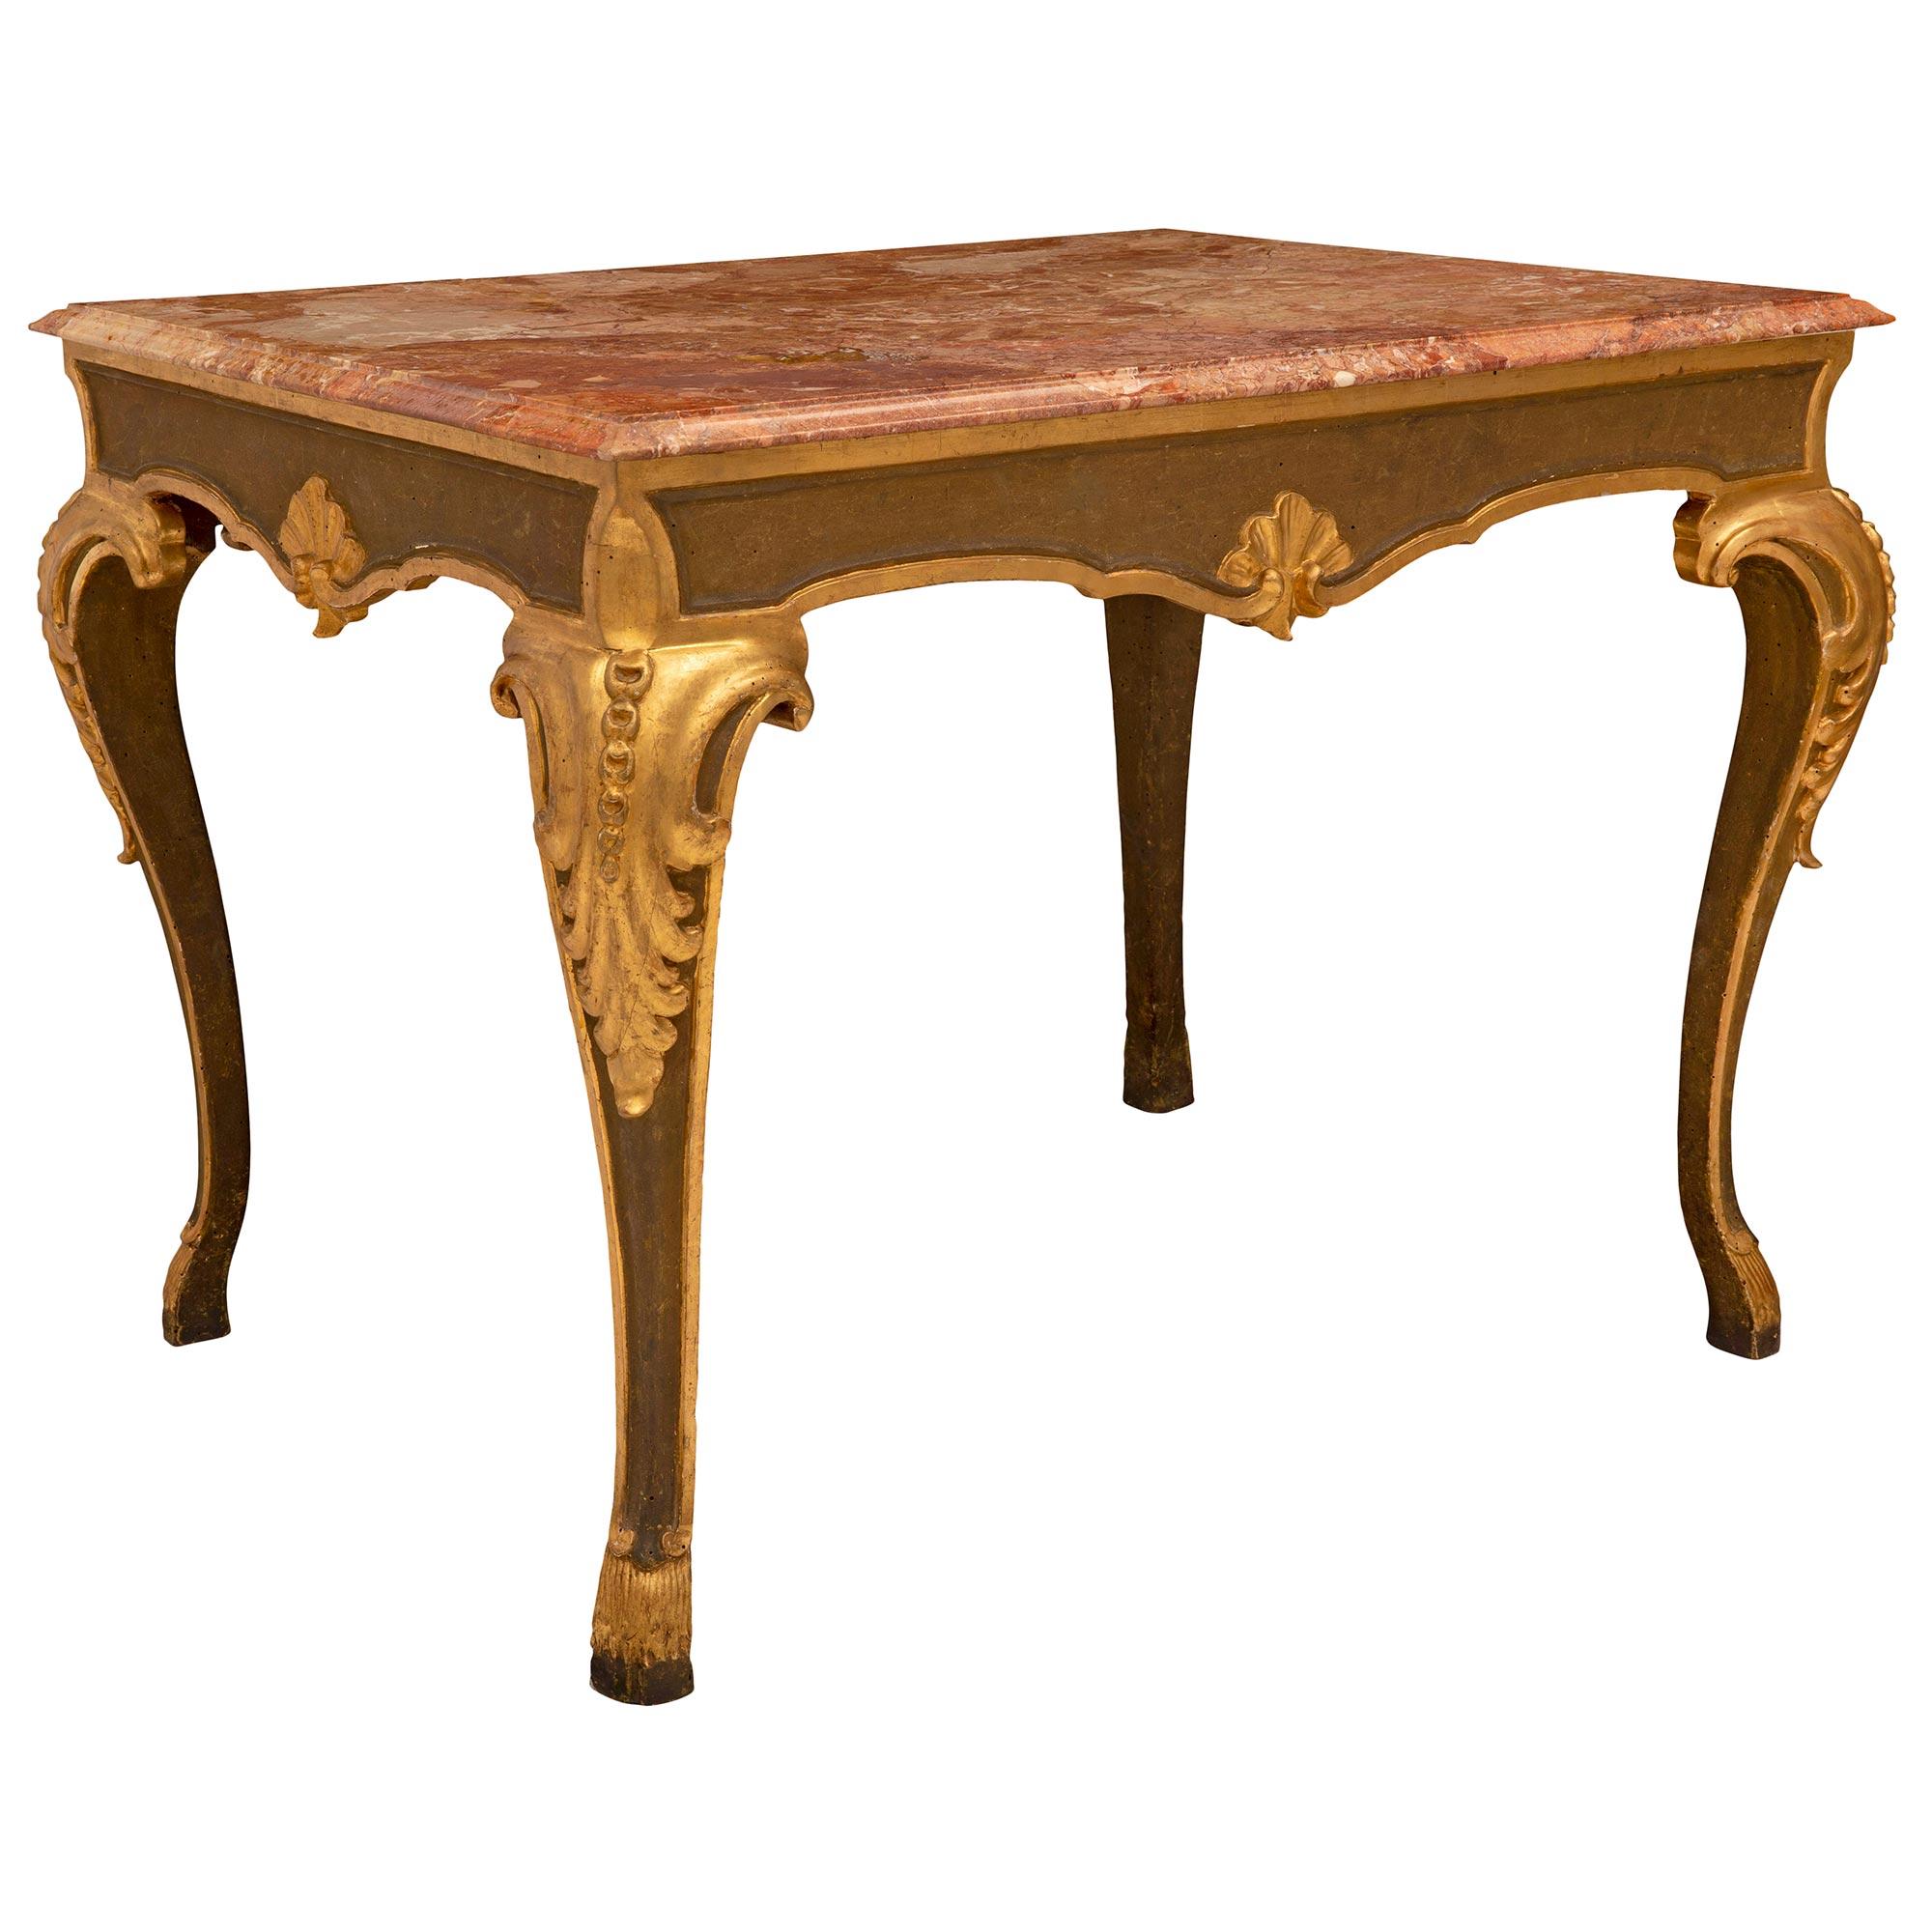 Italian 18th Century Louis XV Period Polychrome and Giltwood Center Table In Good Condition For Sale In West Palm Beach, FL